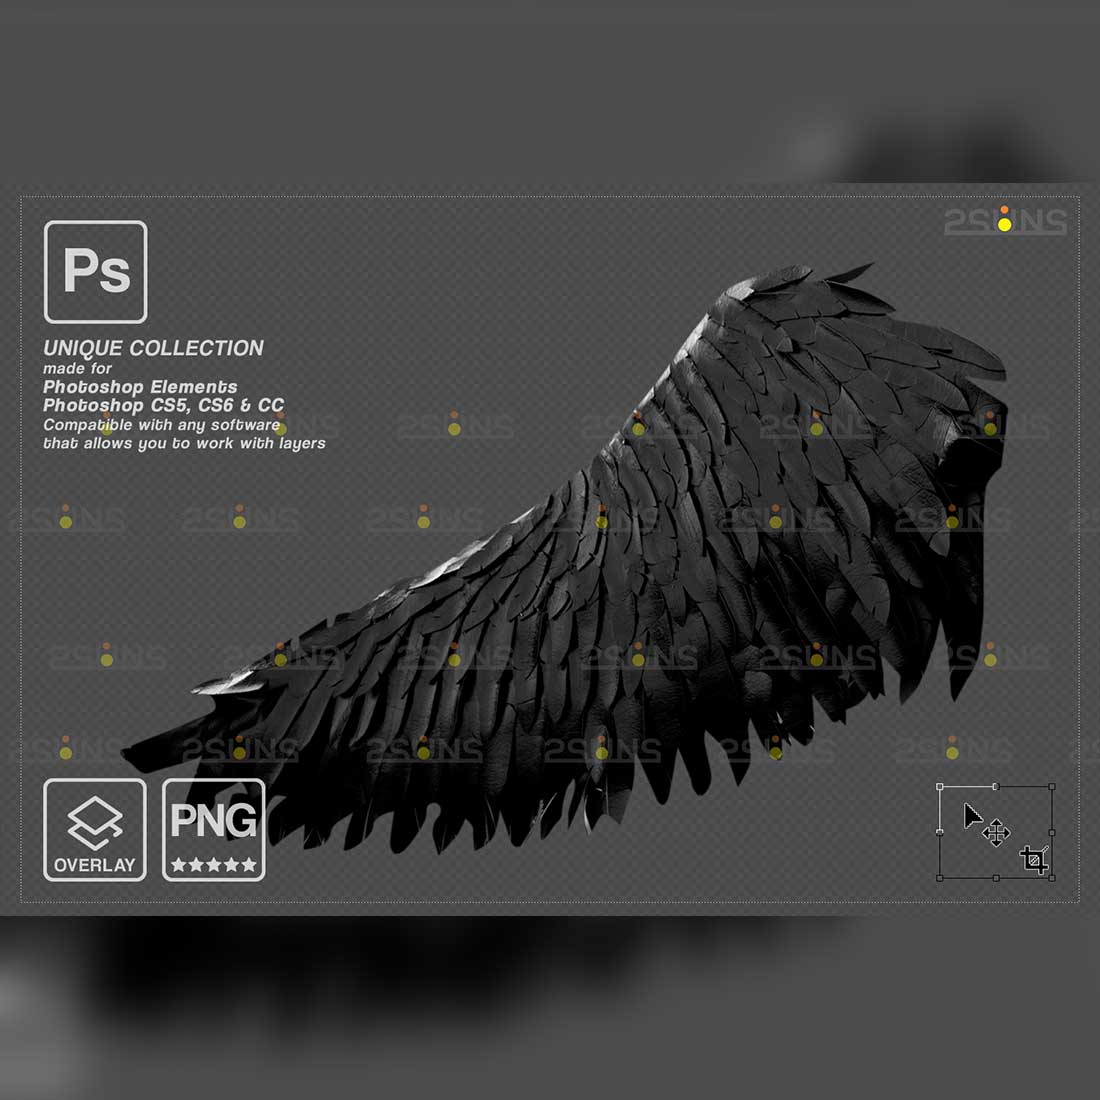 Realistic White Black Gold Angel Wings Photoshop Overlays Black raven wing.